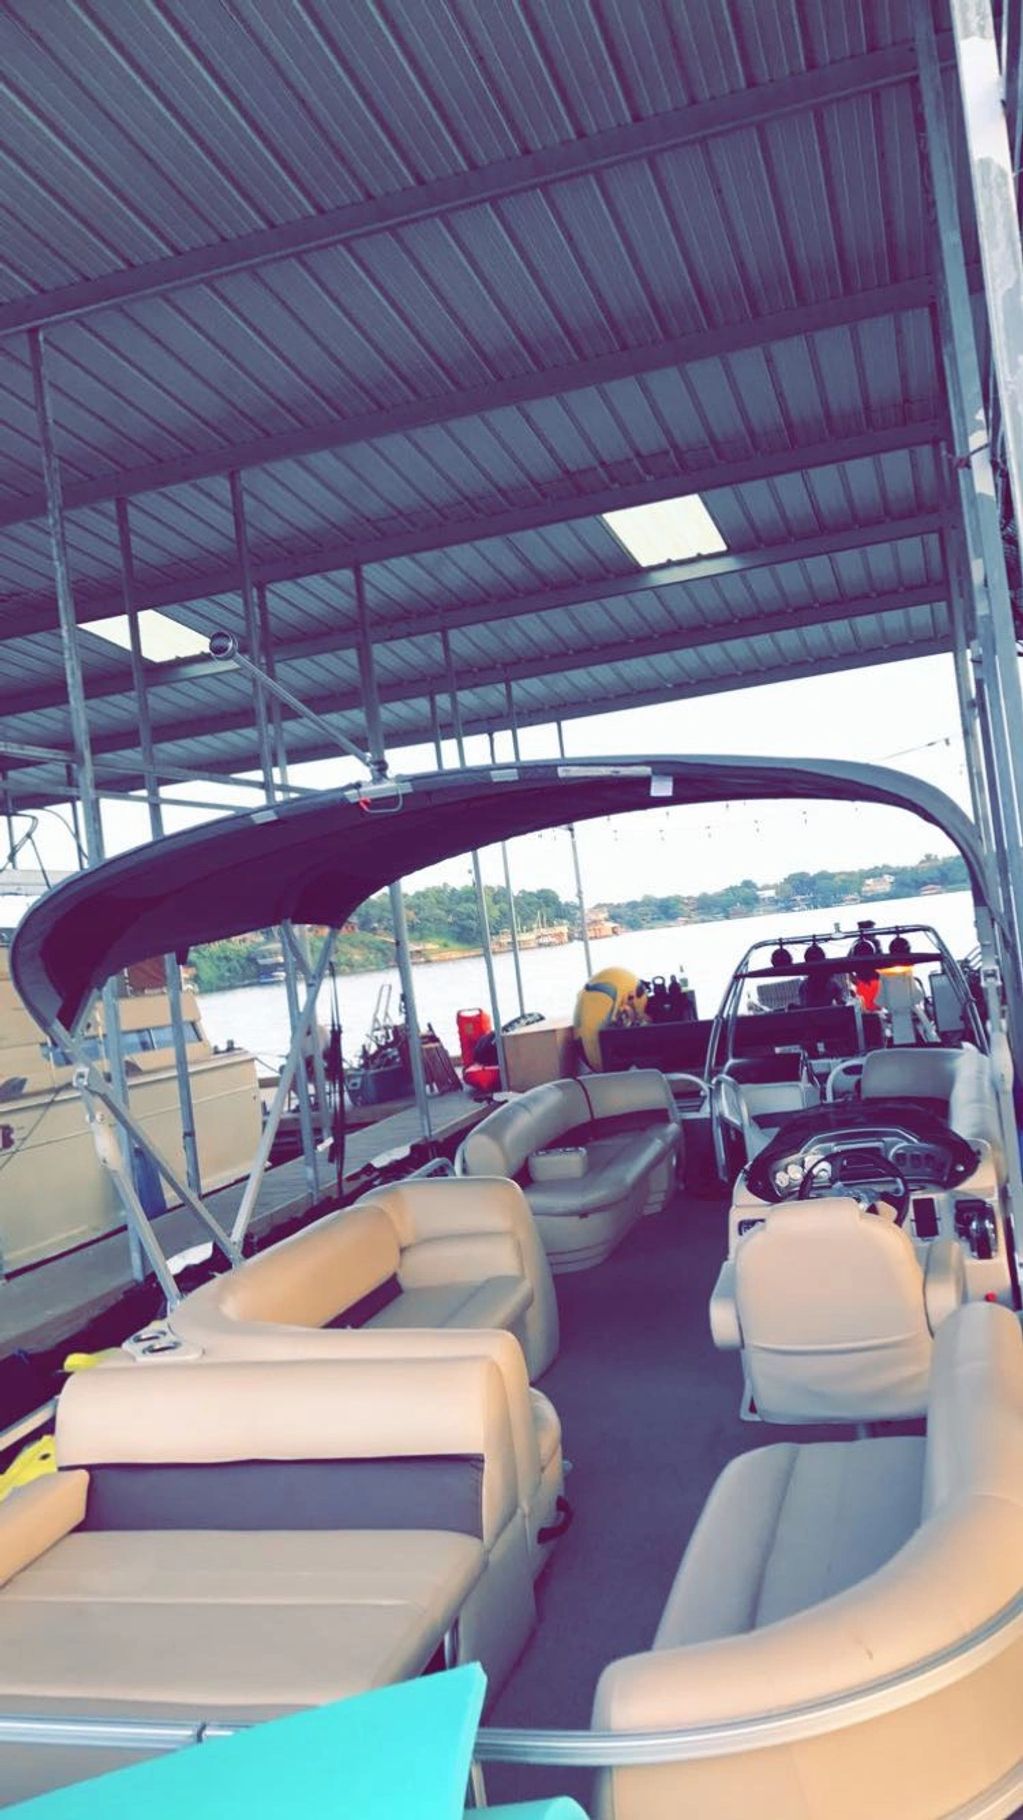 Get on a boat that has a sound system you can hear over the wake. 